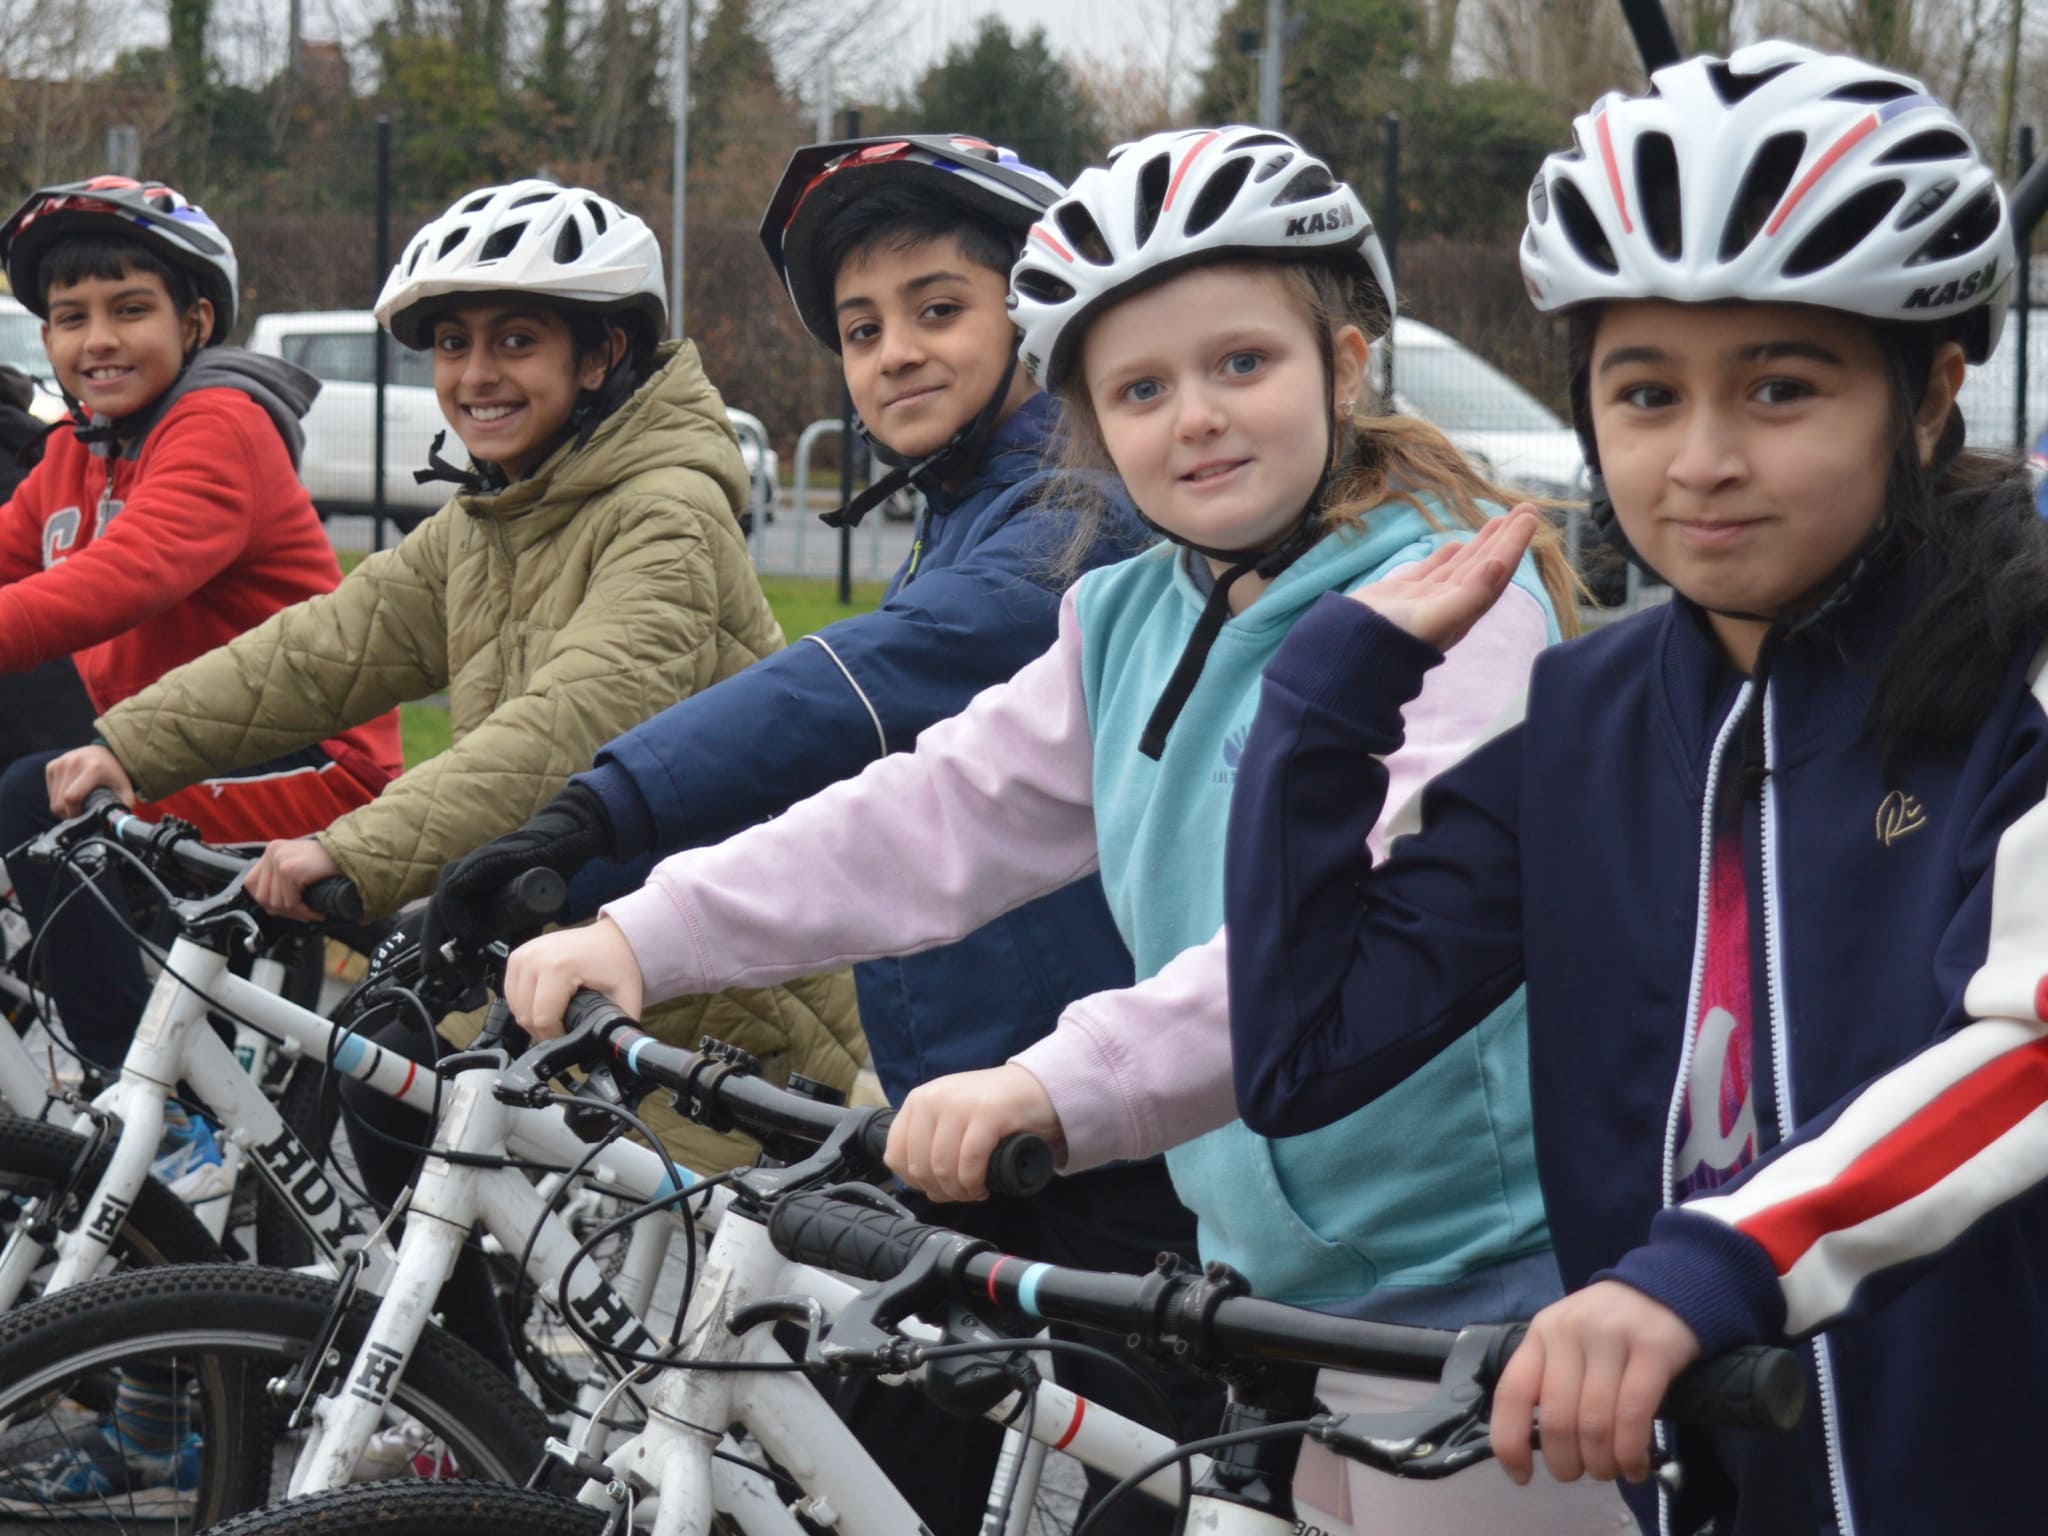 Young people on bikes